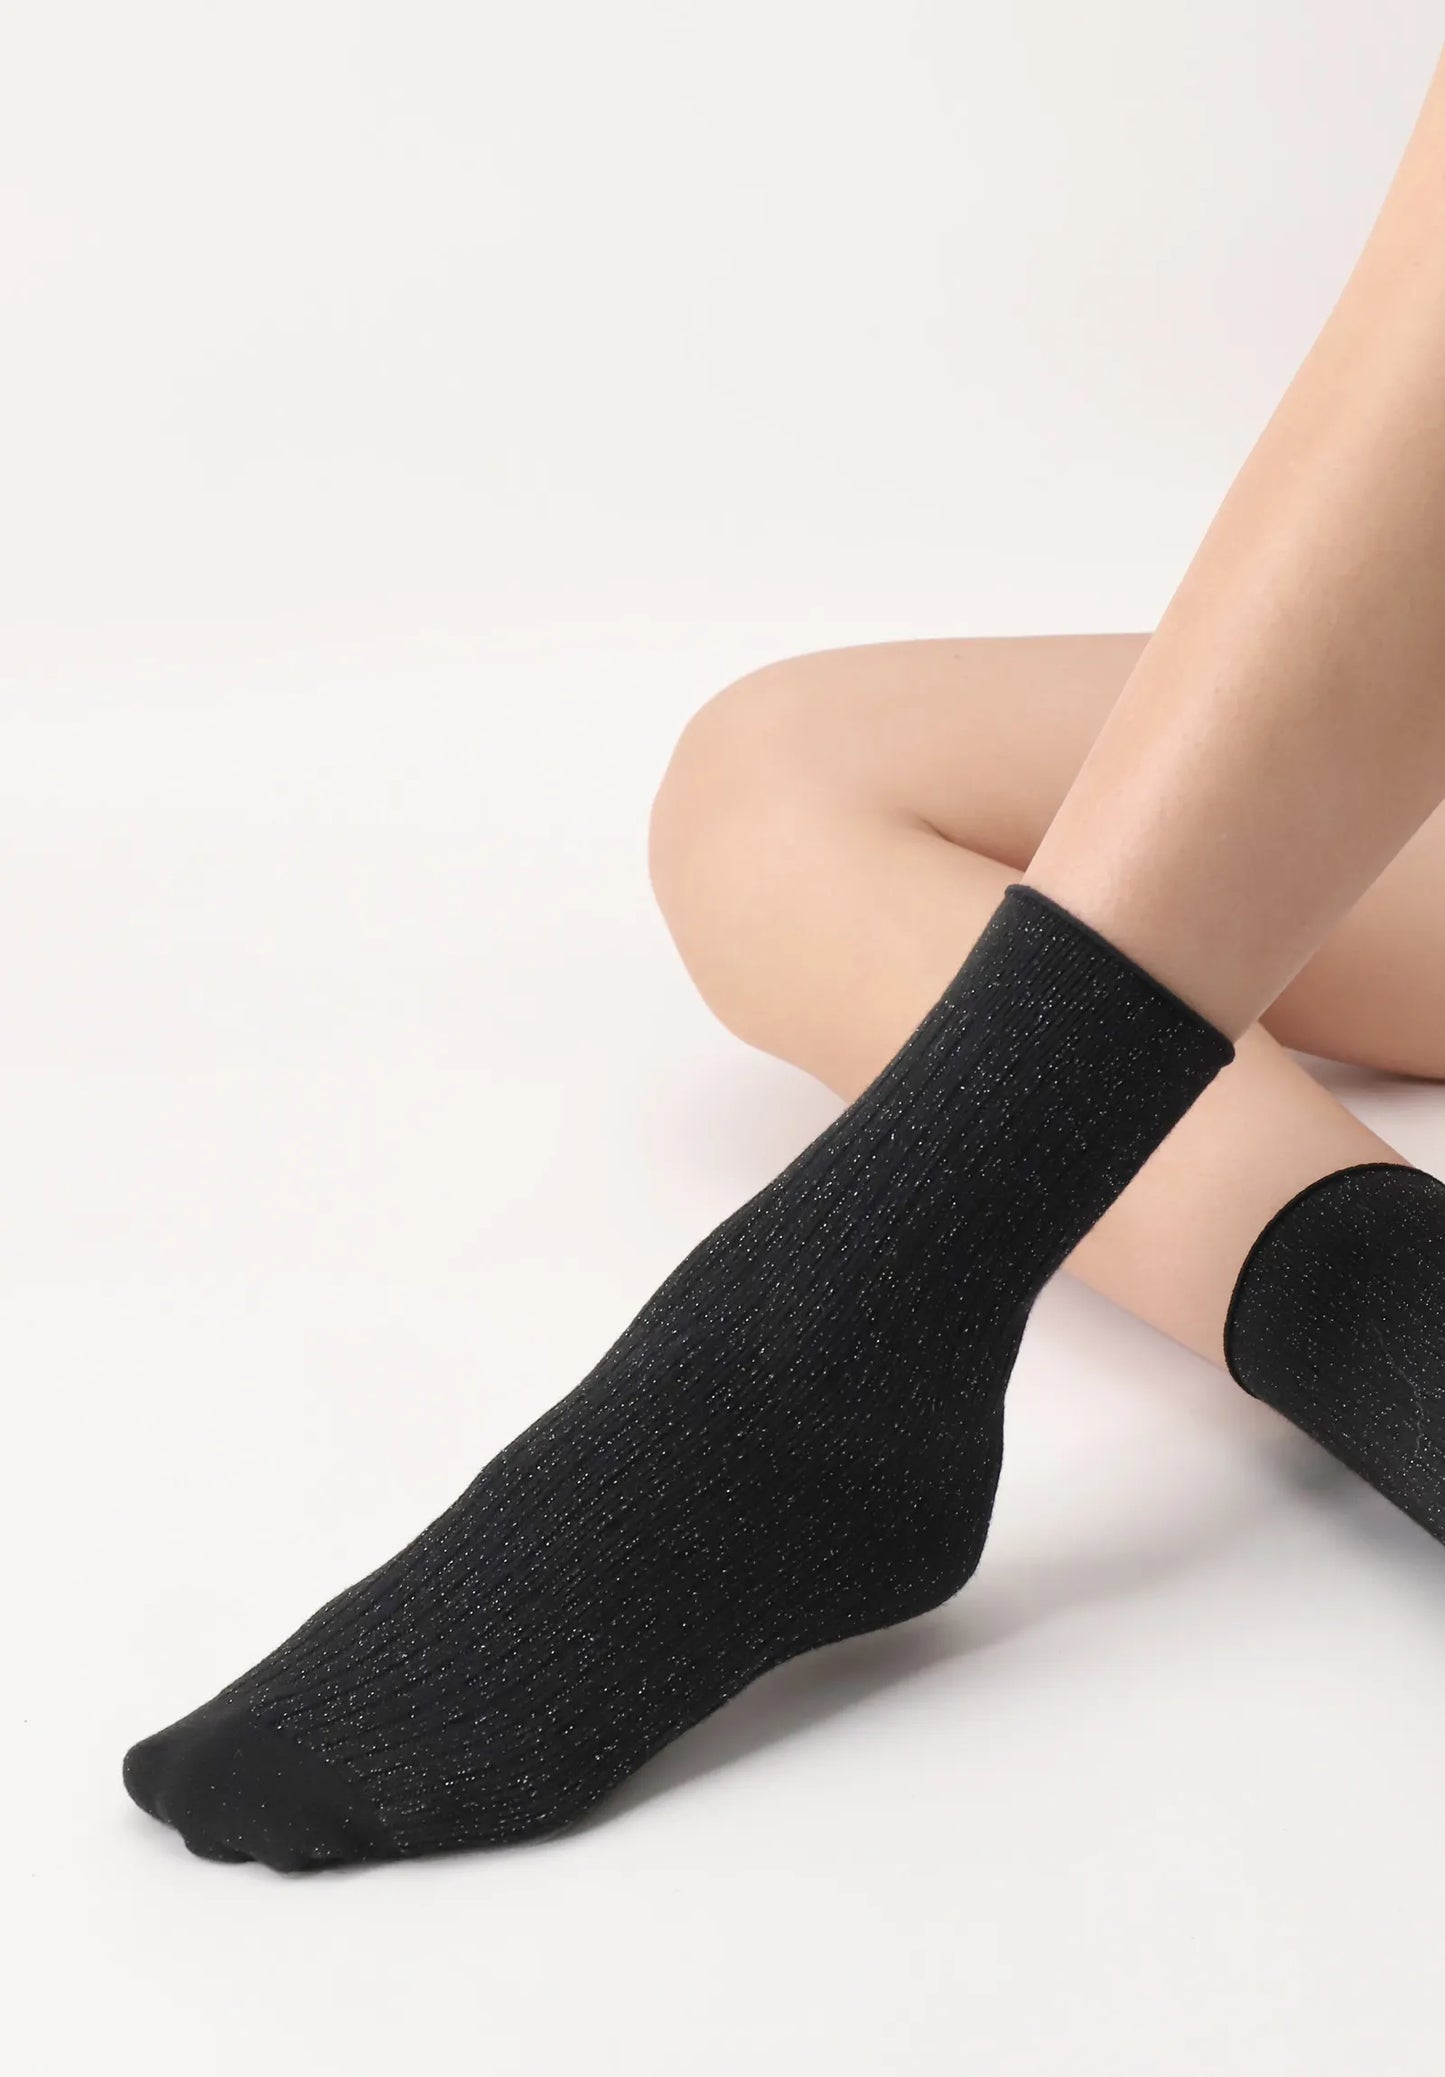 OroblÌ_ Bright Rib Sock - Soft and warm black ribbed knitted ankle socks with sparkly silver lurex throughout.